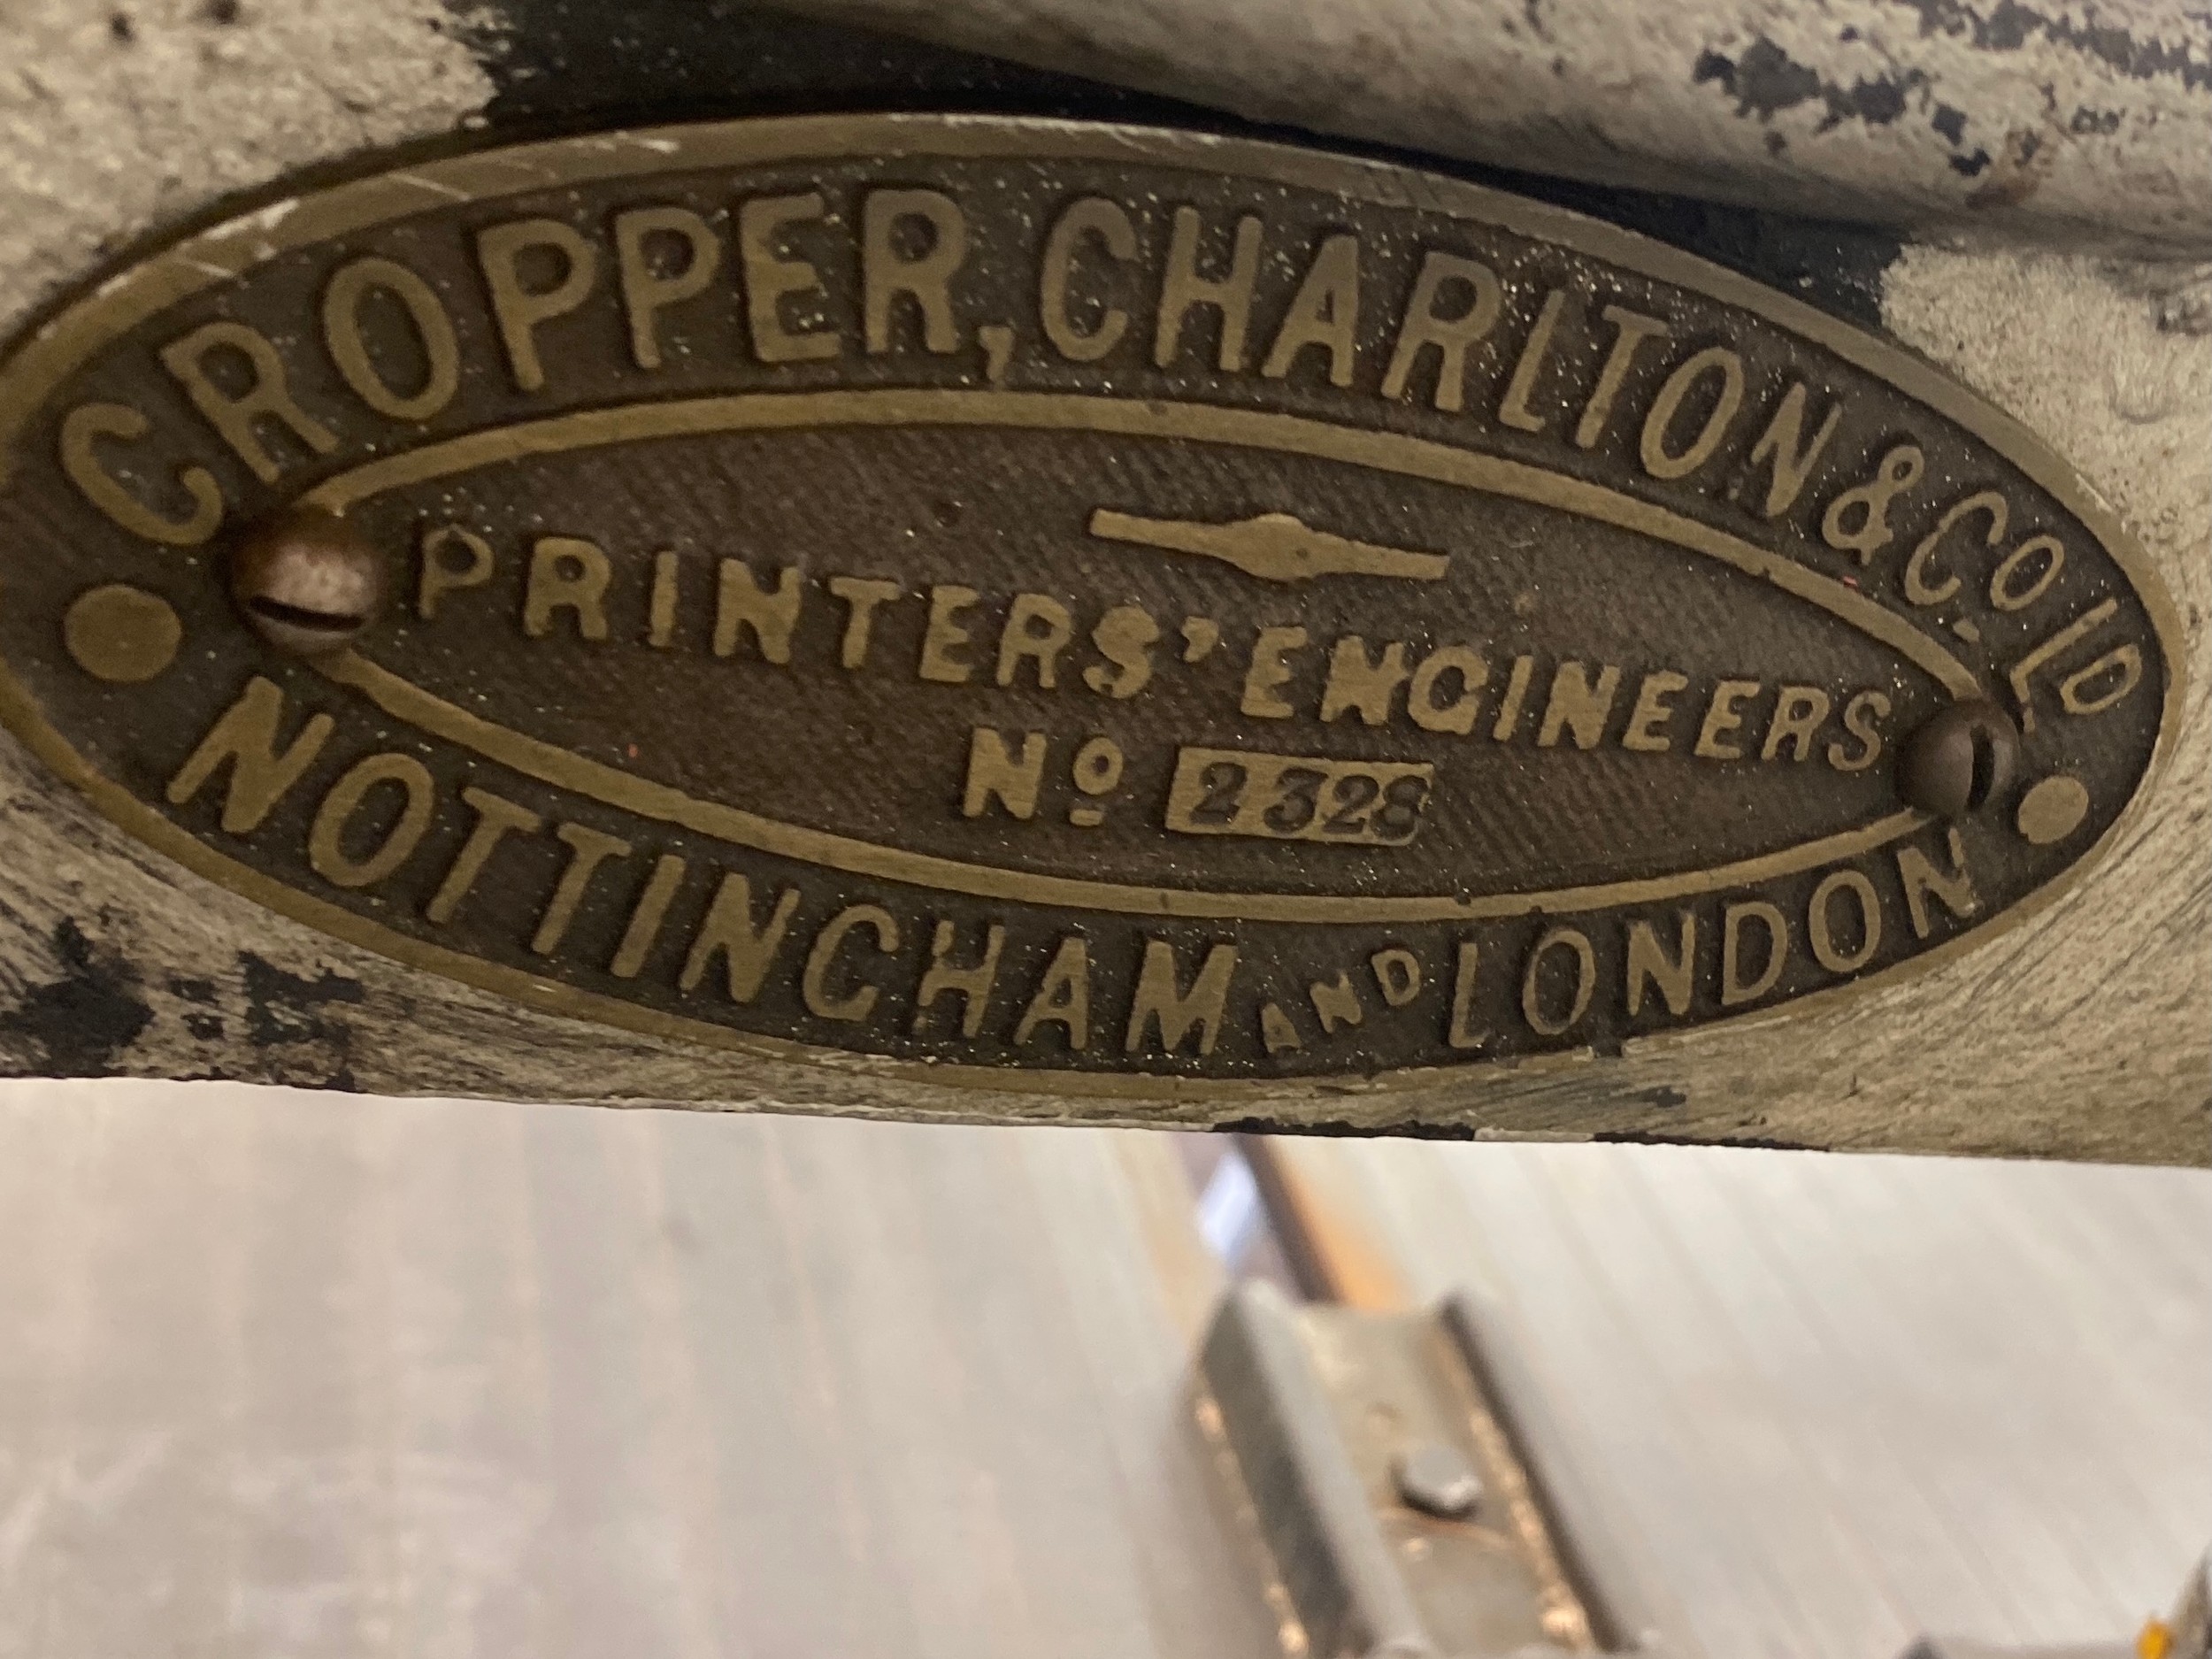 Victorian industrial guillotine proper charlton and co ltd nottingham and london printer ensizers - Image 3 of 3